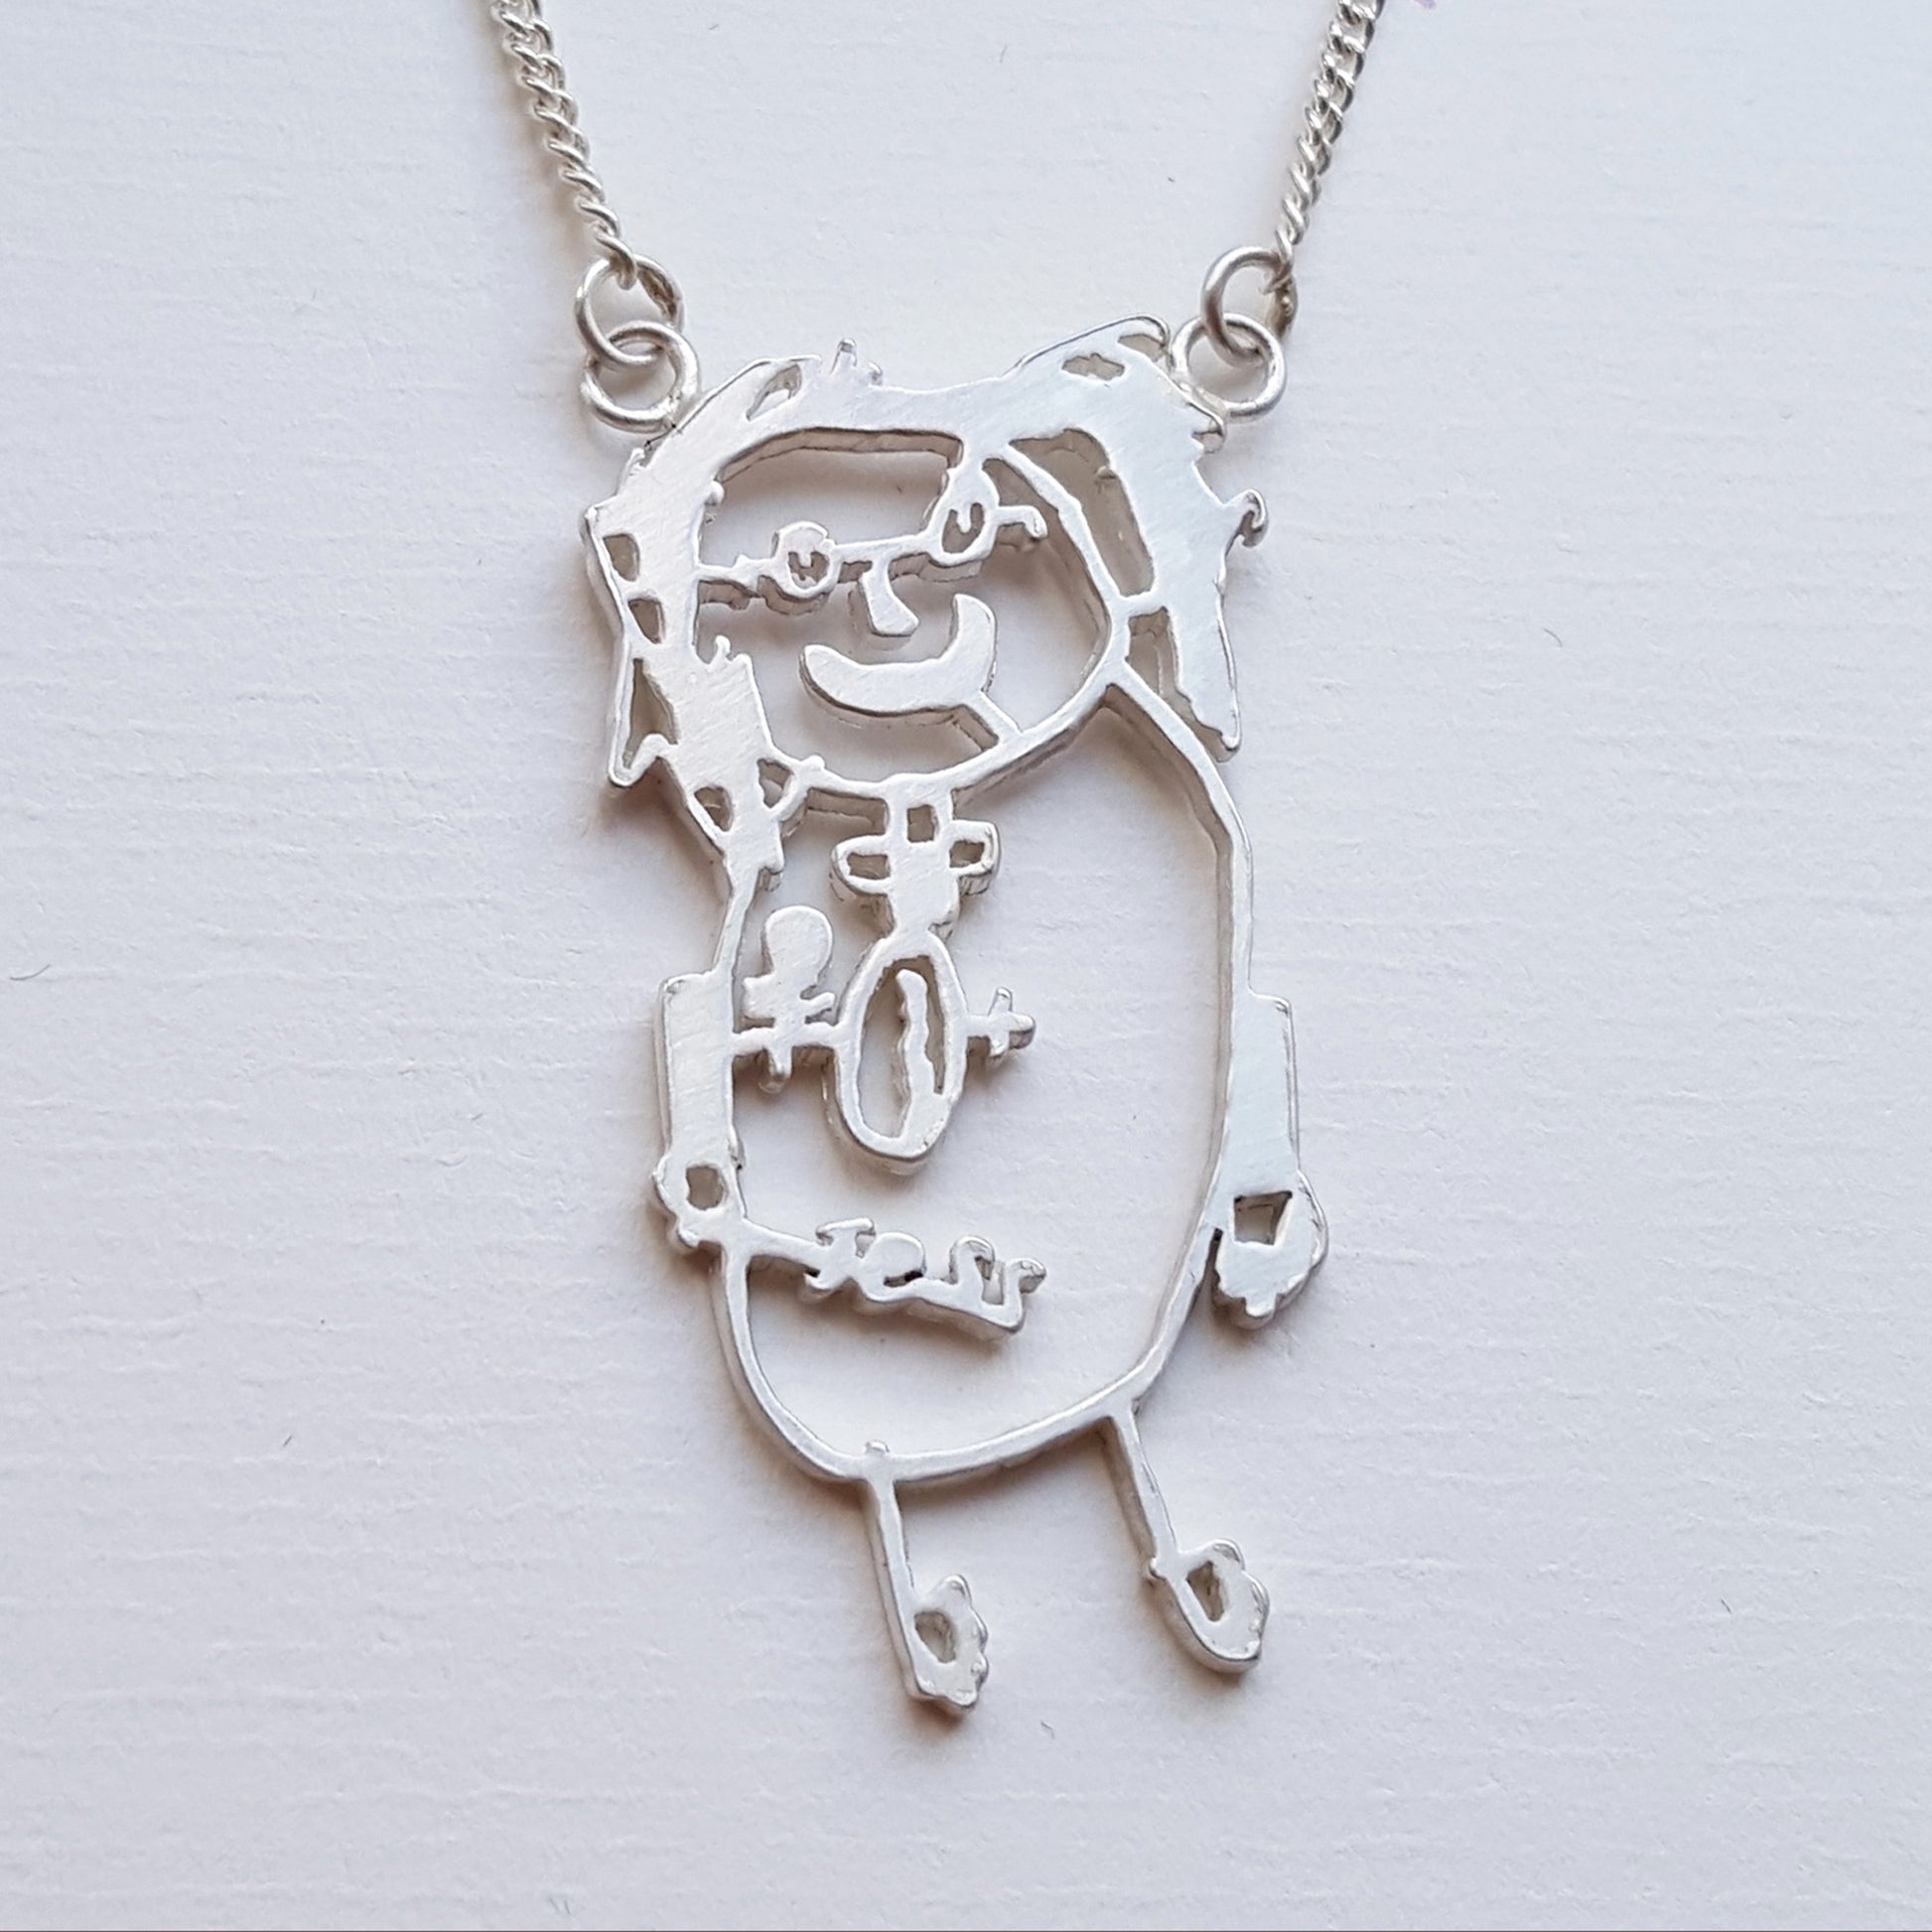 Childrens drawing jewellery necklace sterling silver